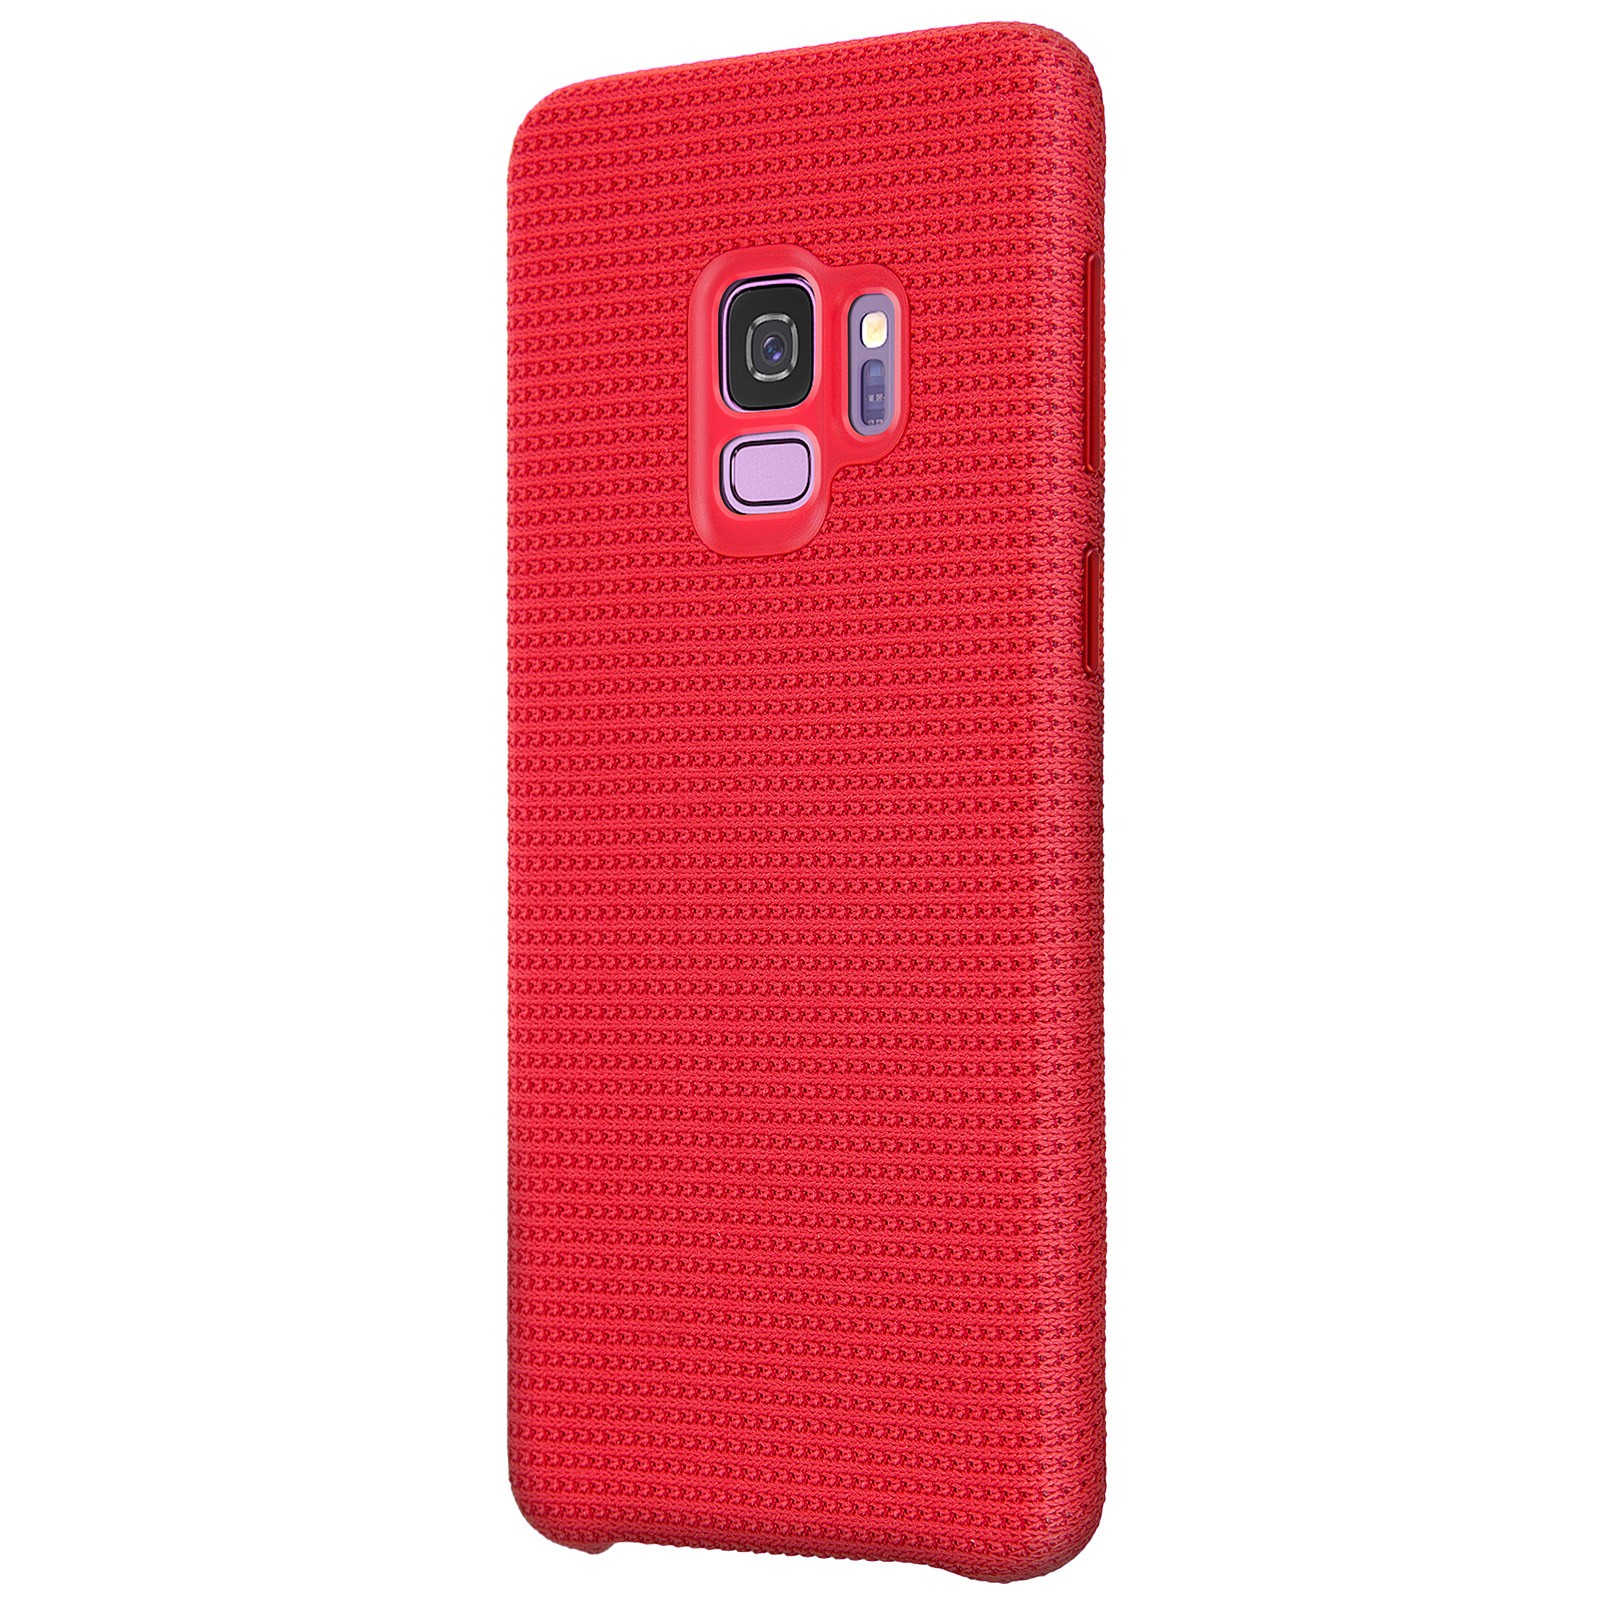 SAMSUNG Hyperknit Cover S9, S9 Bookcover, Galaxy for (Red), Angabe Galaxy Keine Samsung, - Case